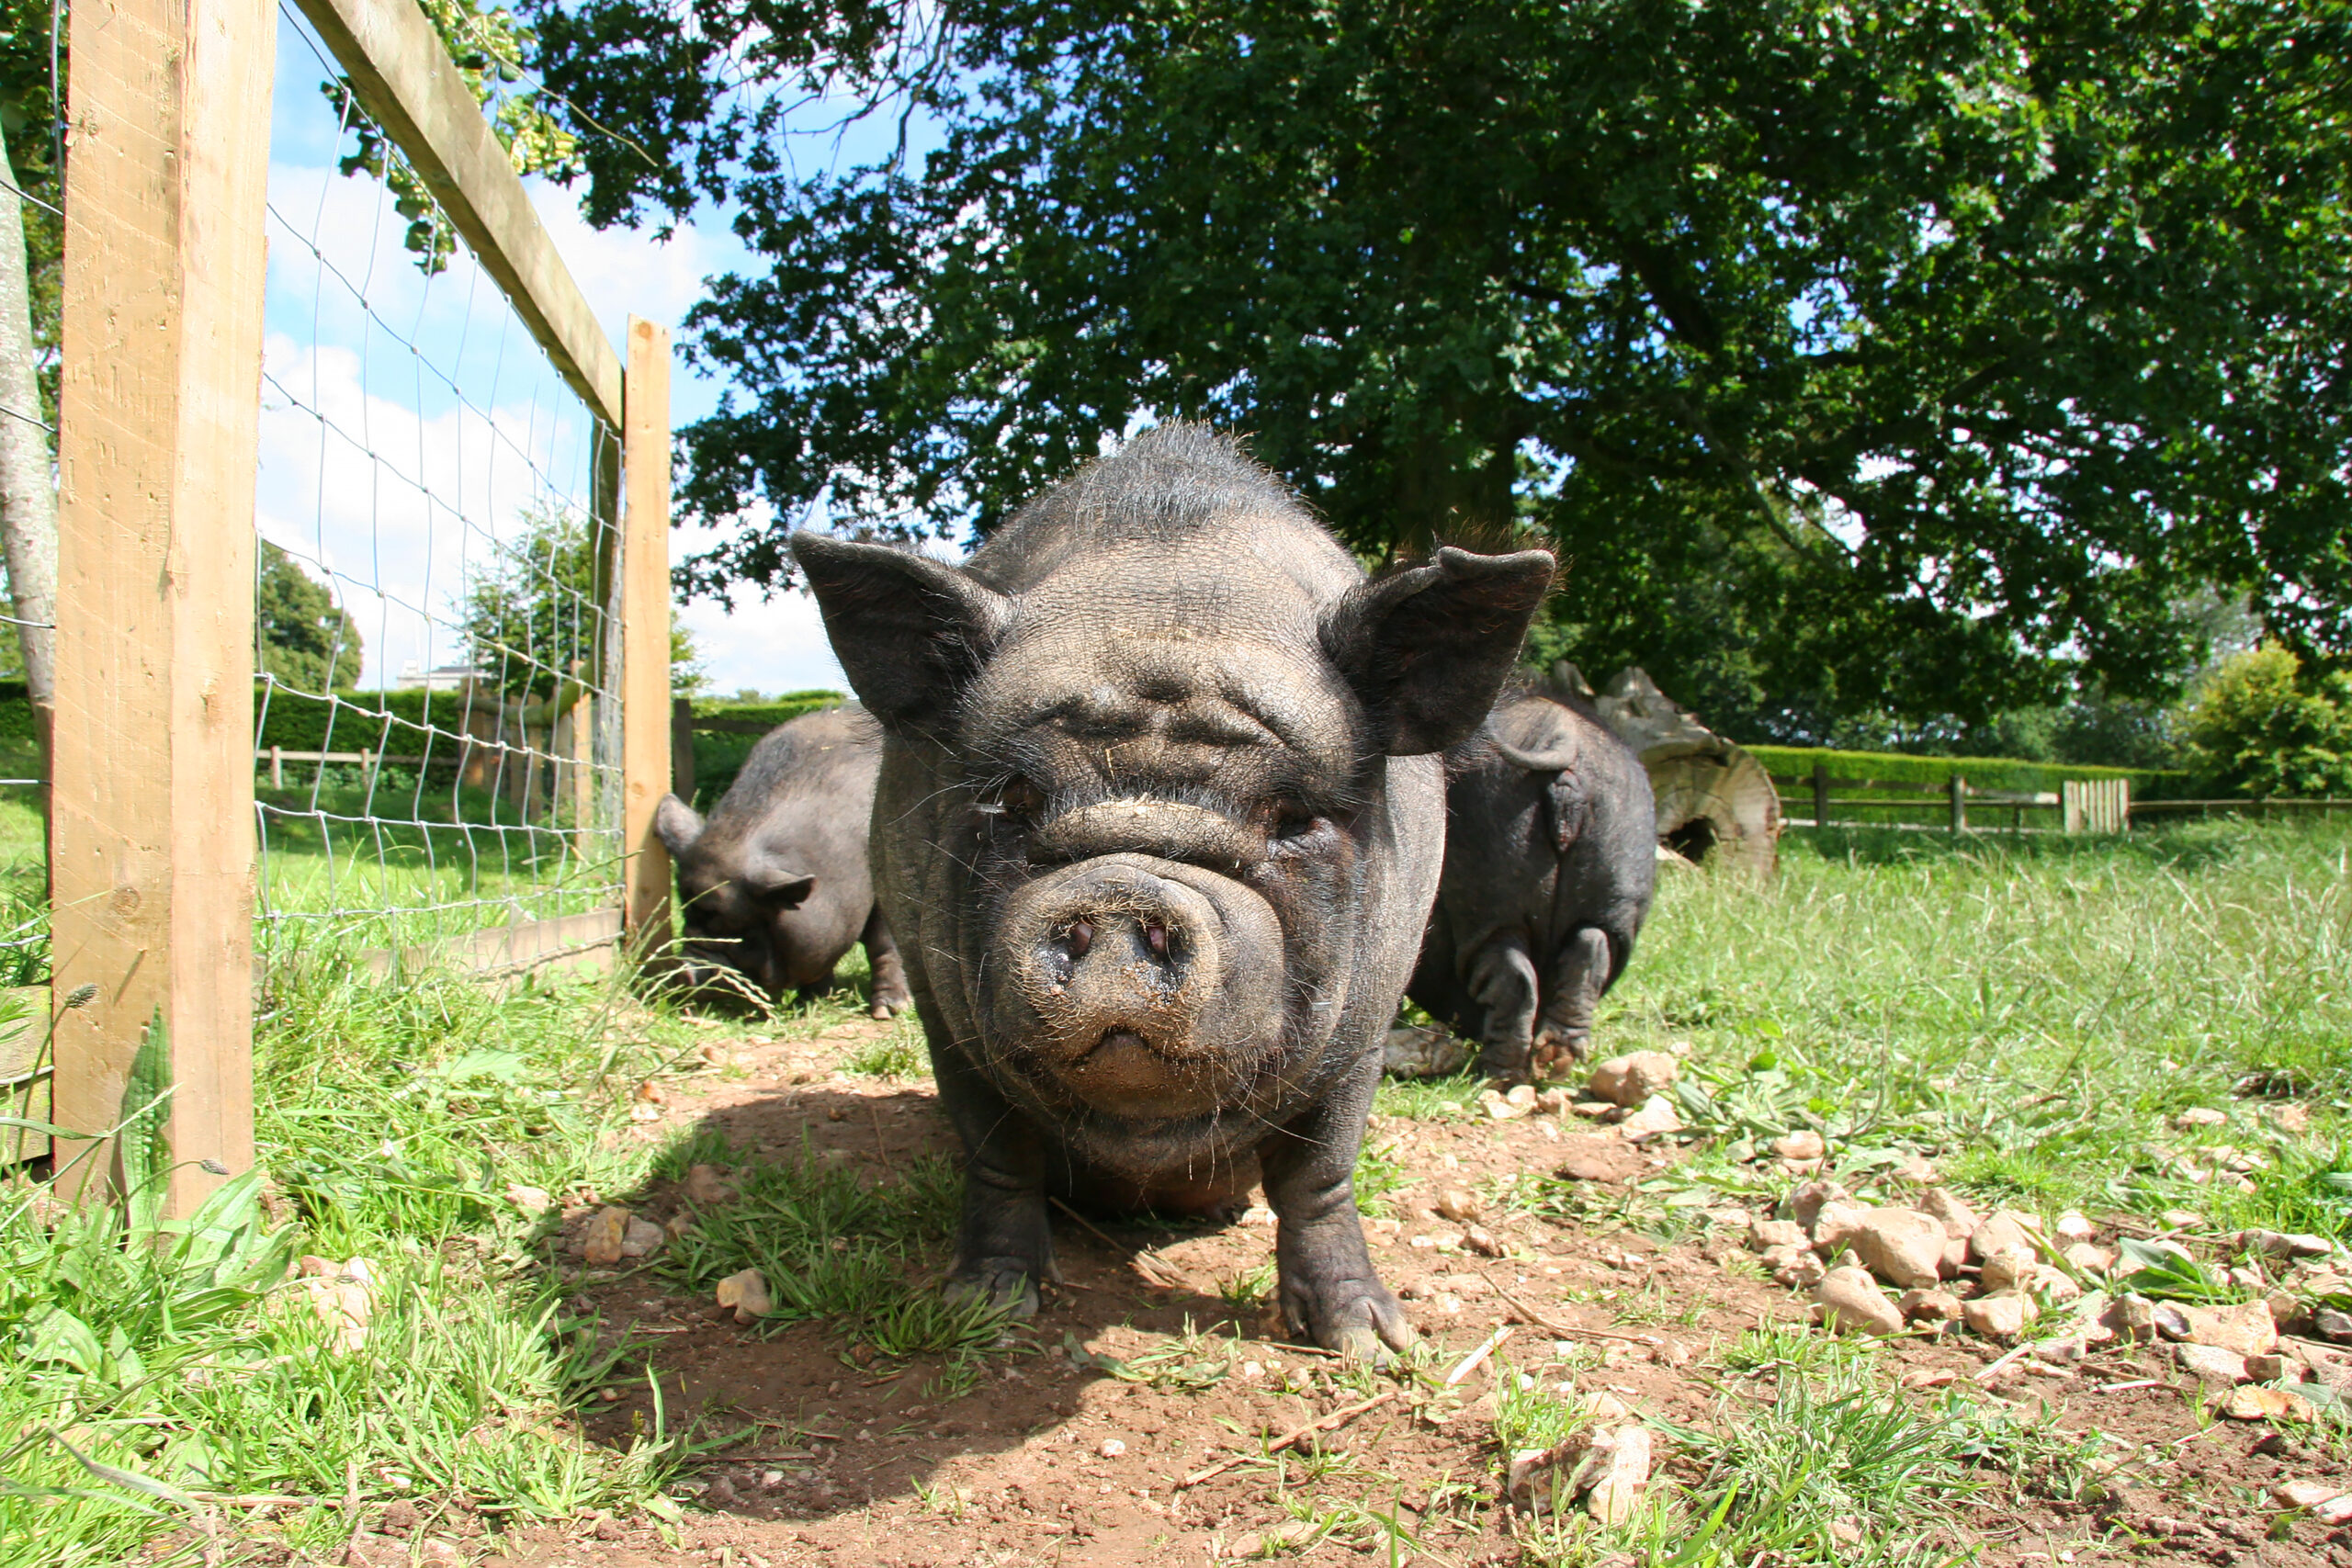 Heat stress – how to keep your pig cool and safe in warm weather